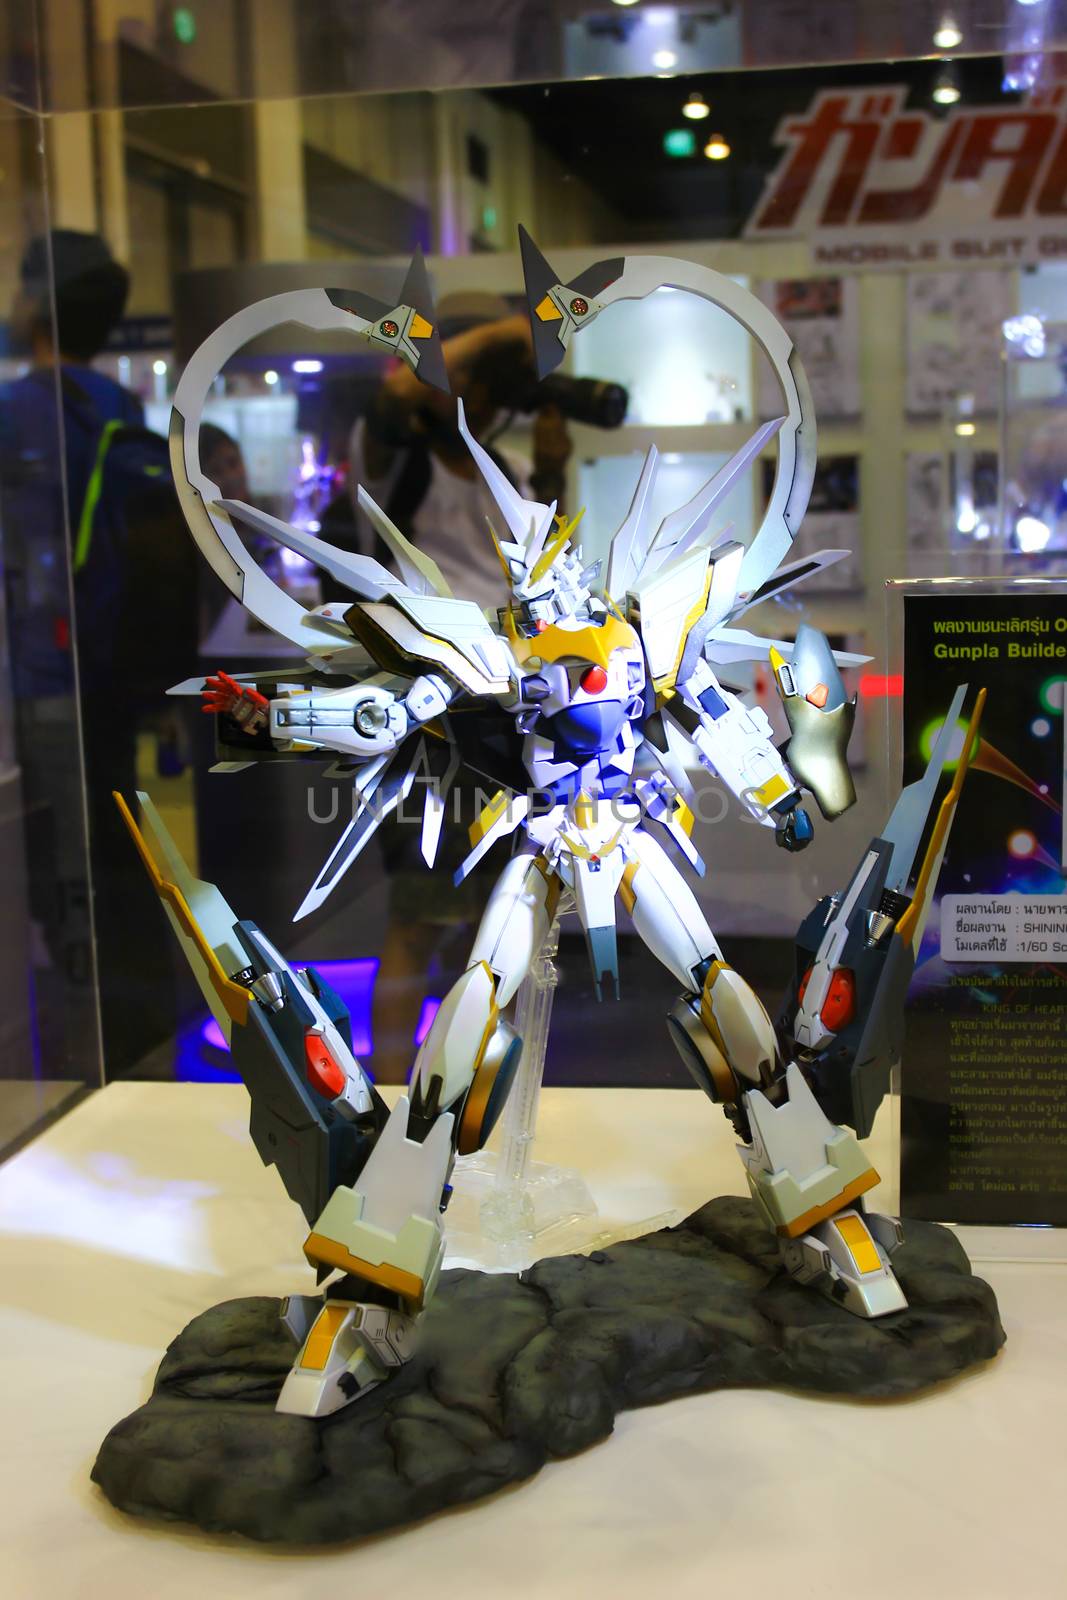 A model of the character Gundam from the movies and comics 13 by redthirteen